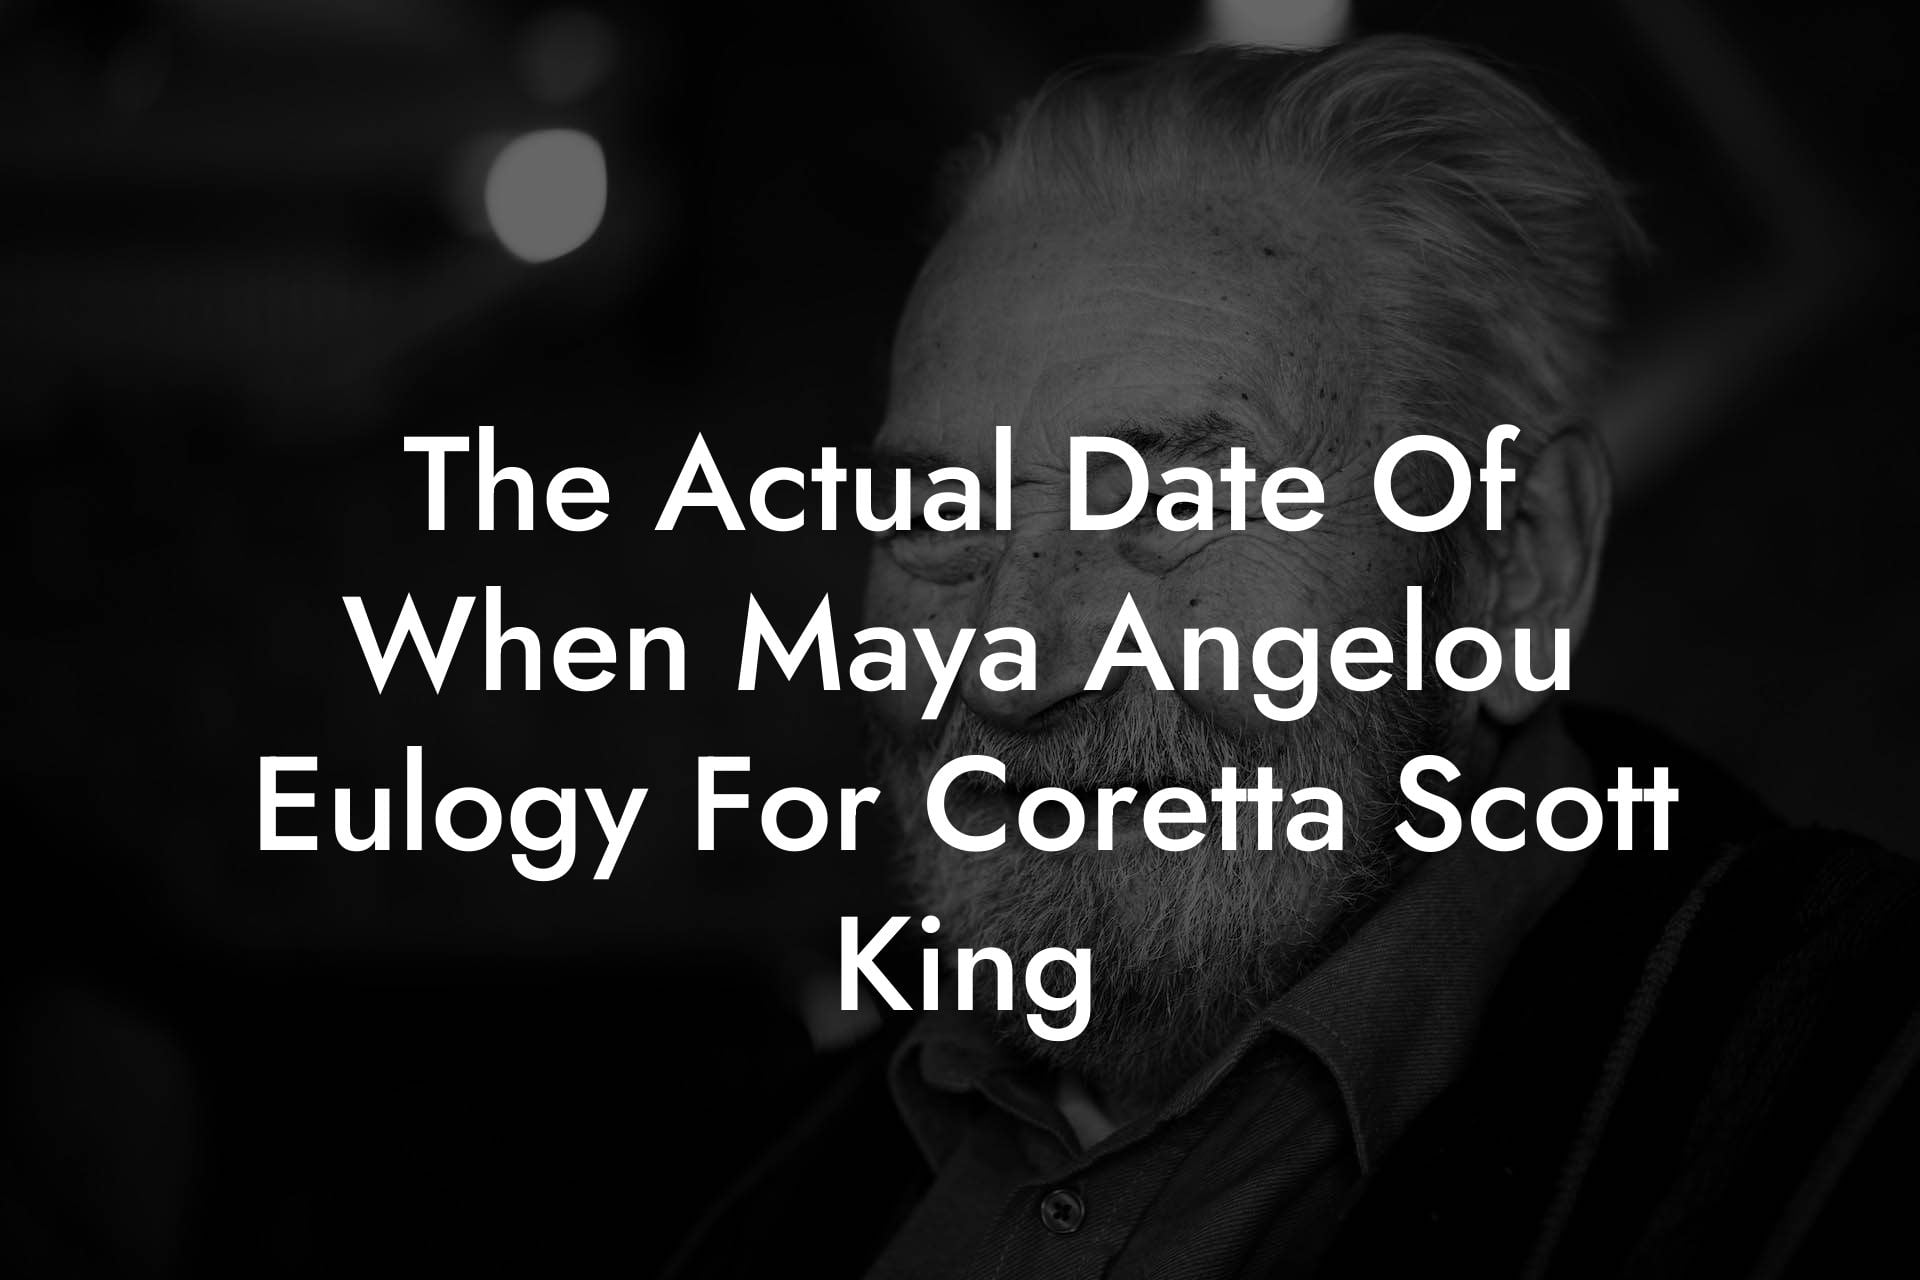 The Actual Date Of When Maya Angelou Eulogy For Coretta Scott King